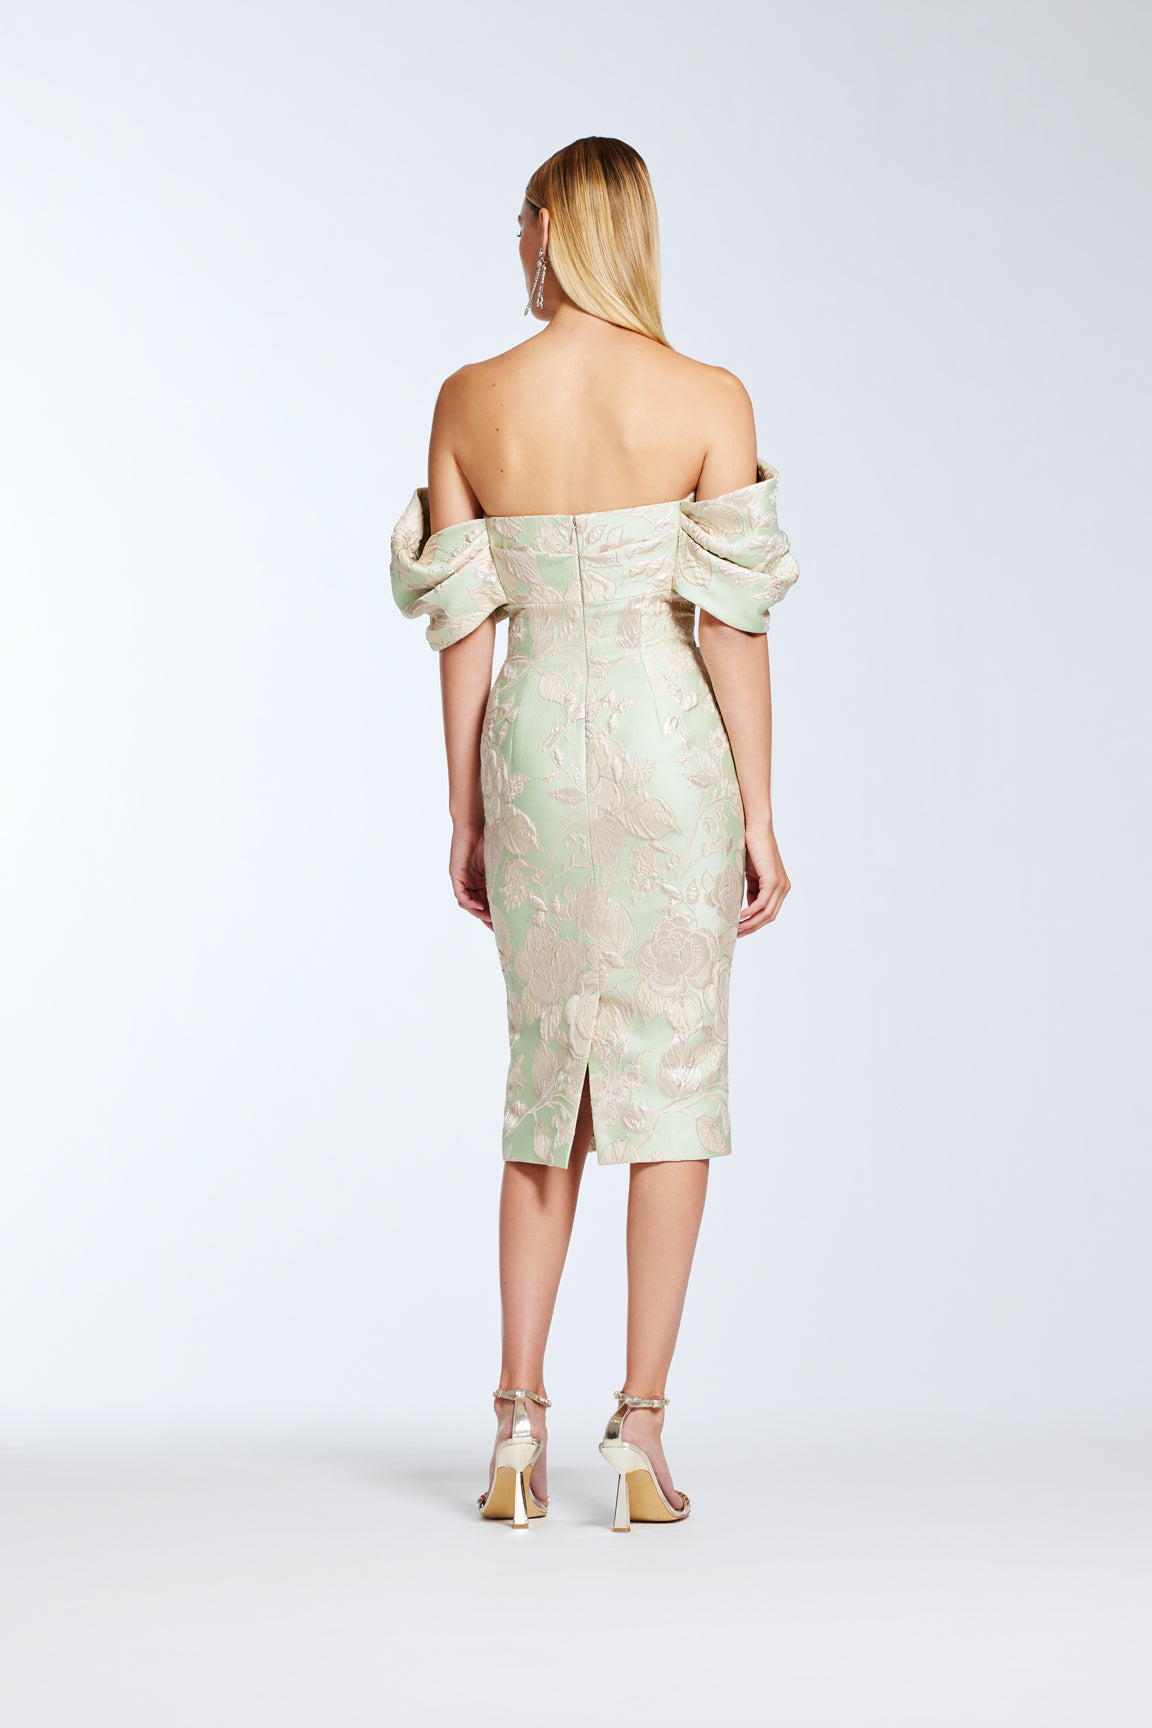 Frascara 4442 Off-the-Shoulder Draped Dress - An elegant off-the-shoulder dress with draped bodice and sleeves, sheath skirt silhouette, perfect for evening formal events and mother of the bride or groom. Model is wearing mint.  back view